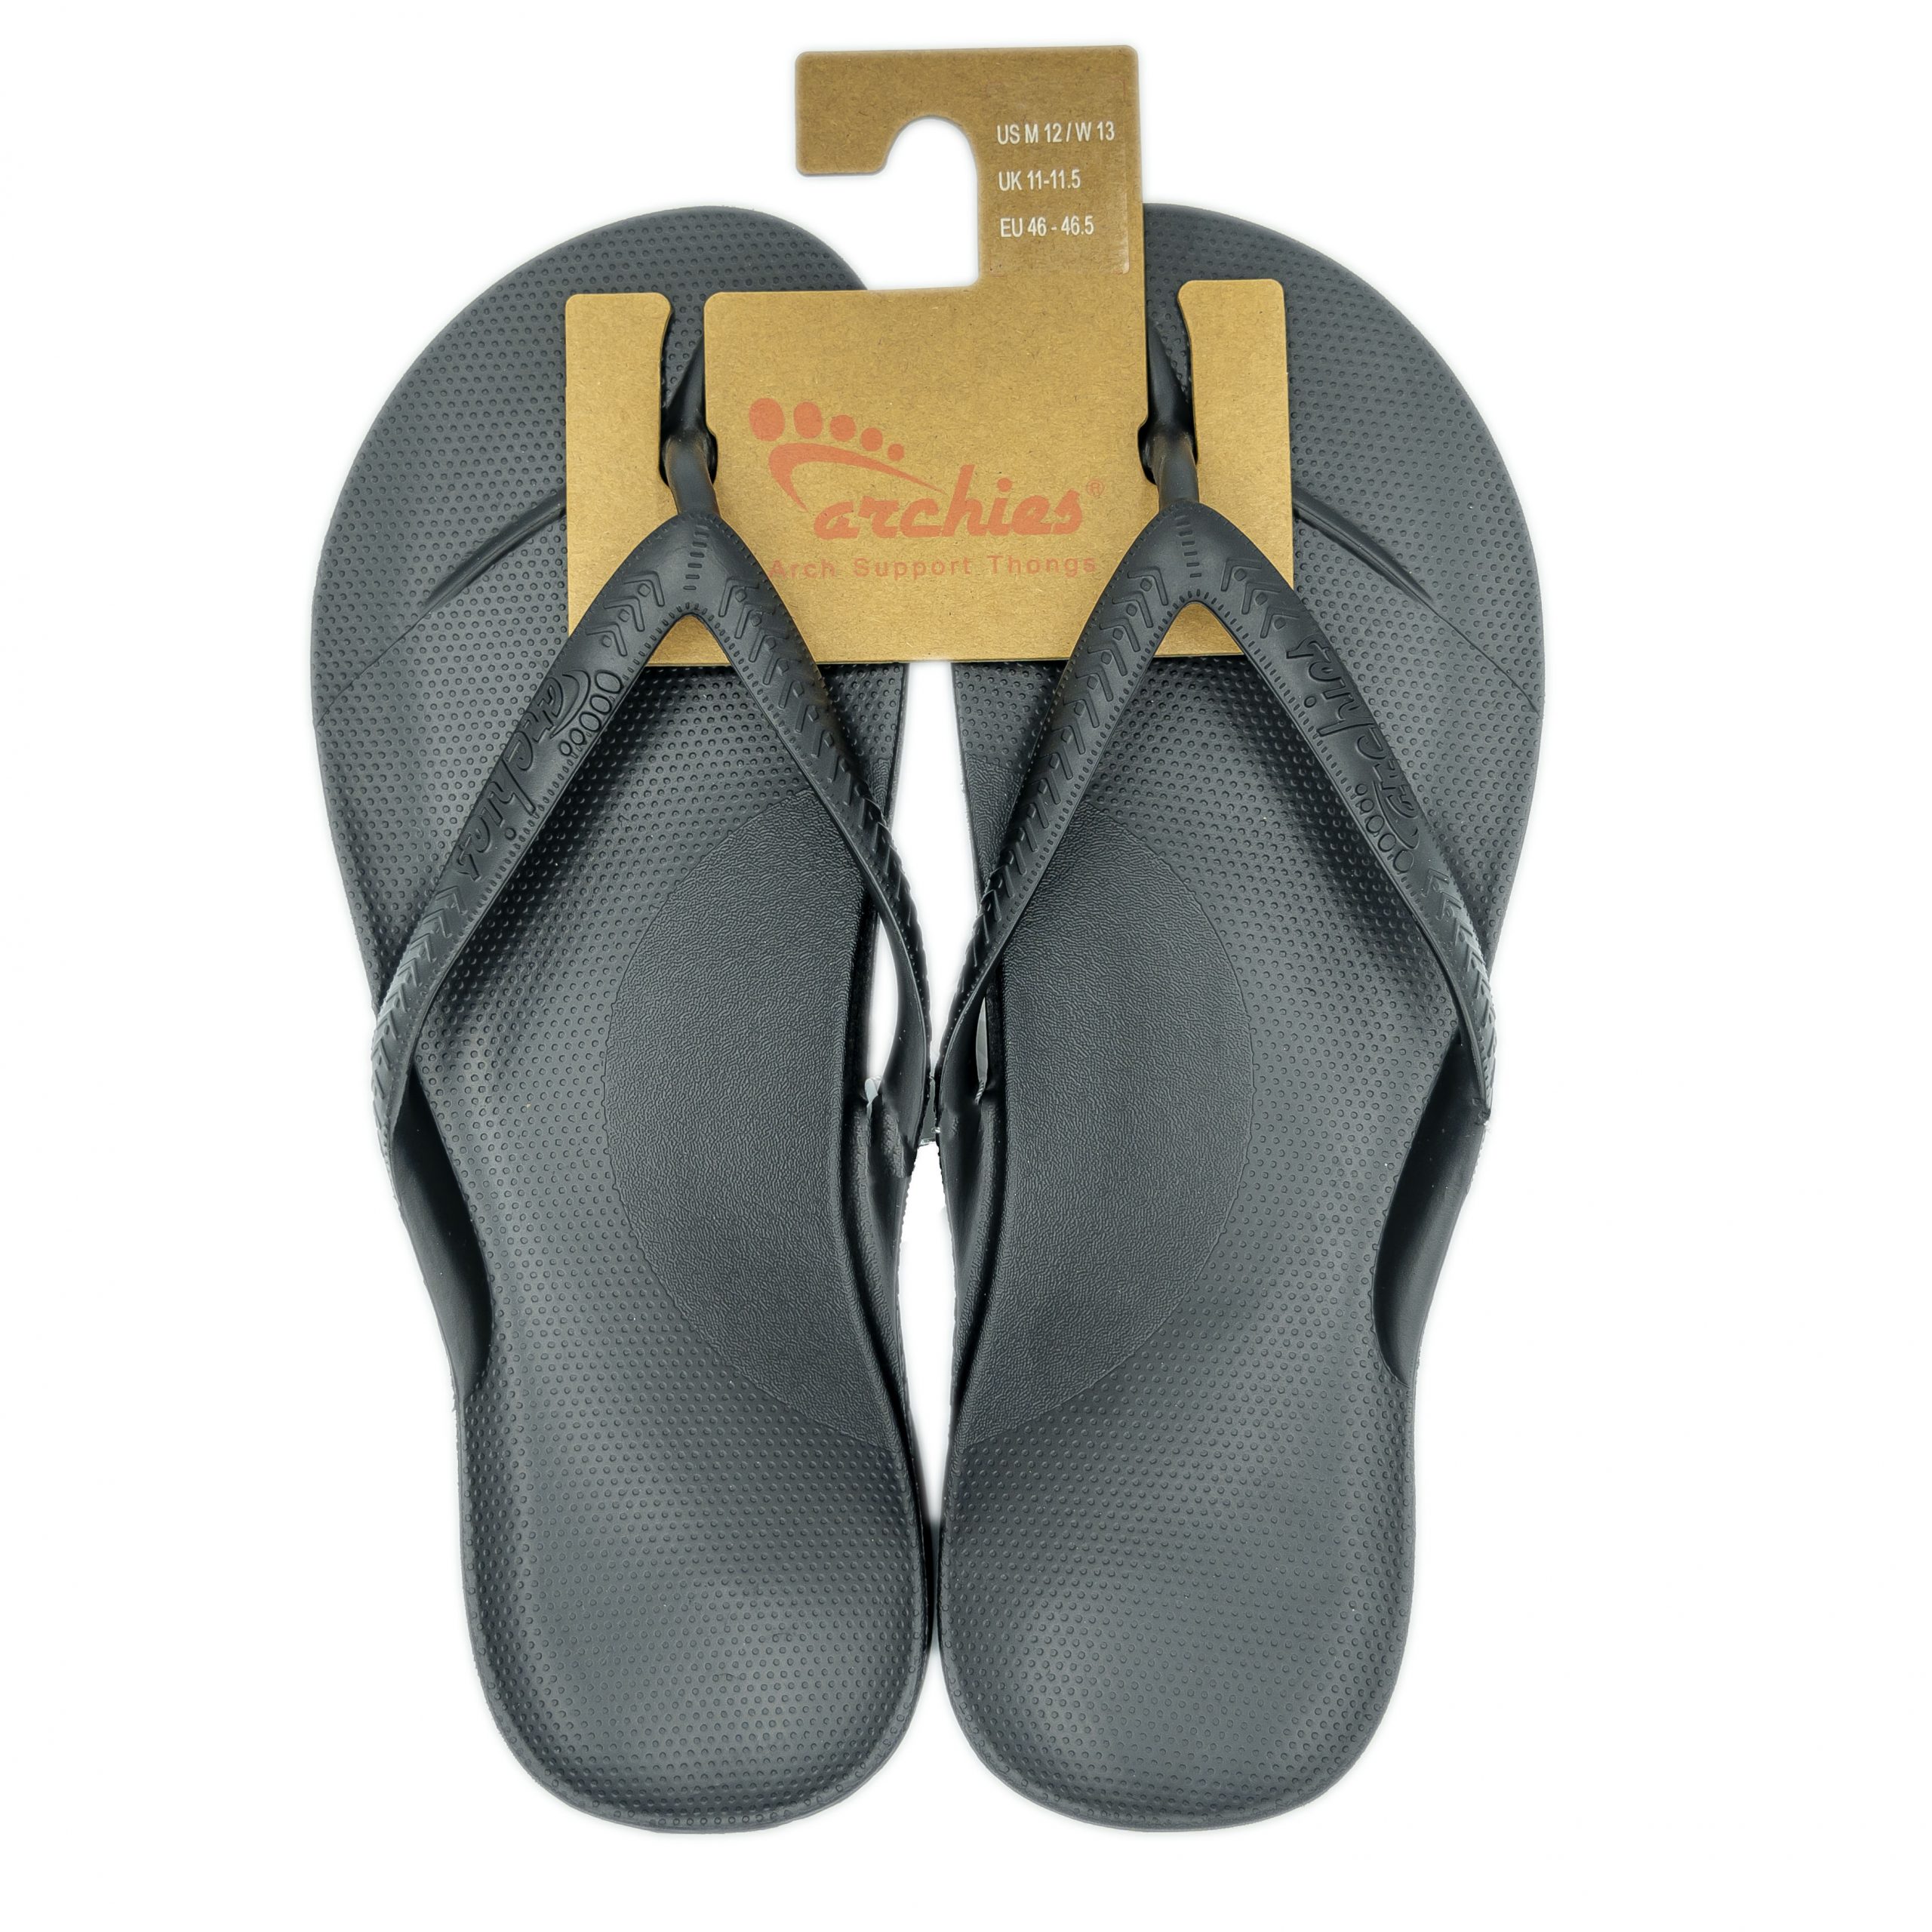 https://www.livewellhealthcentre.com.au/wp-content/uploads/2022/09/Archies-Arch-Support-Thongs-scaled.jpg